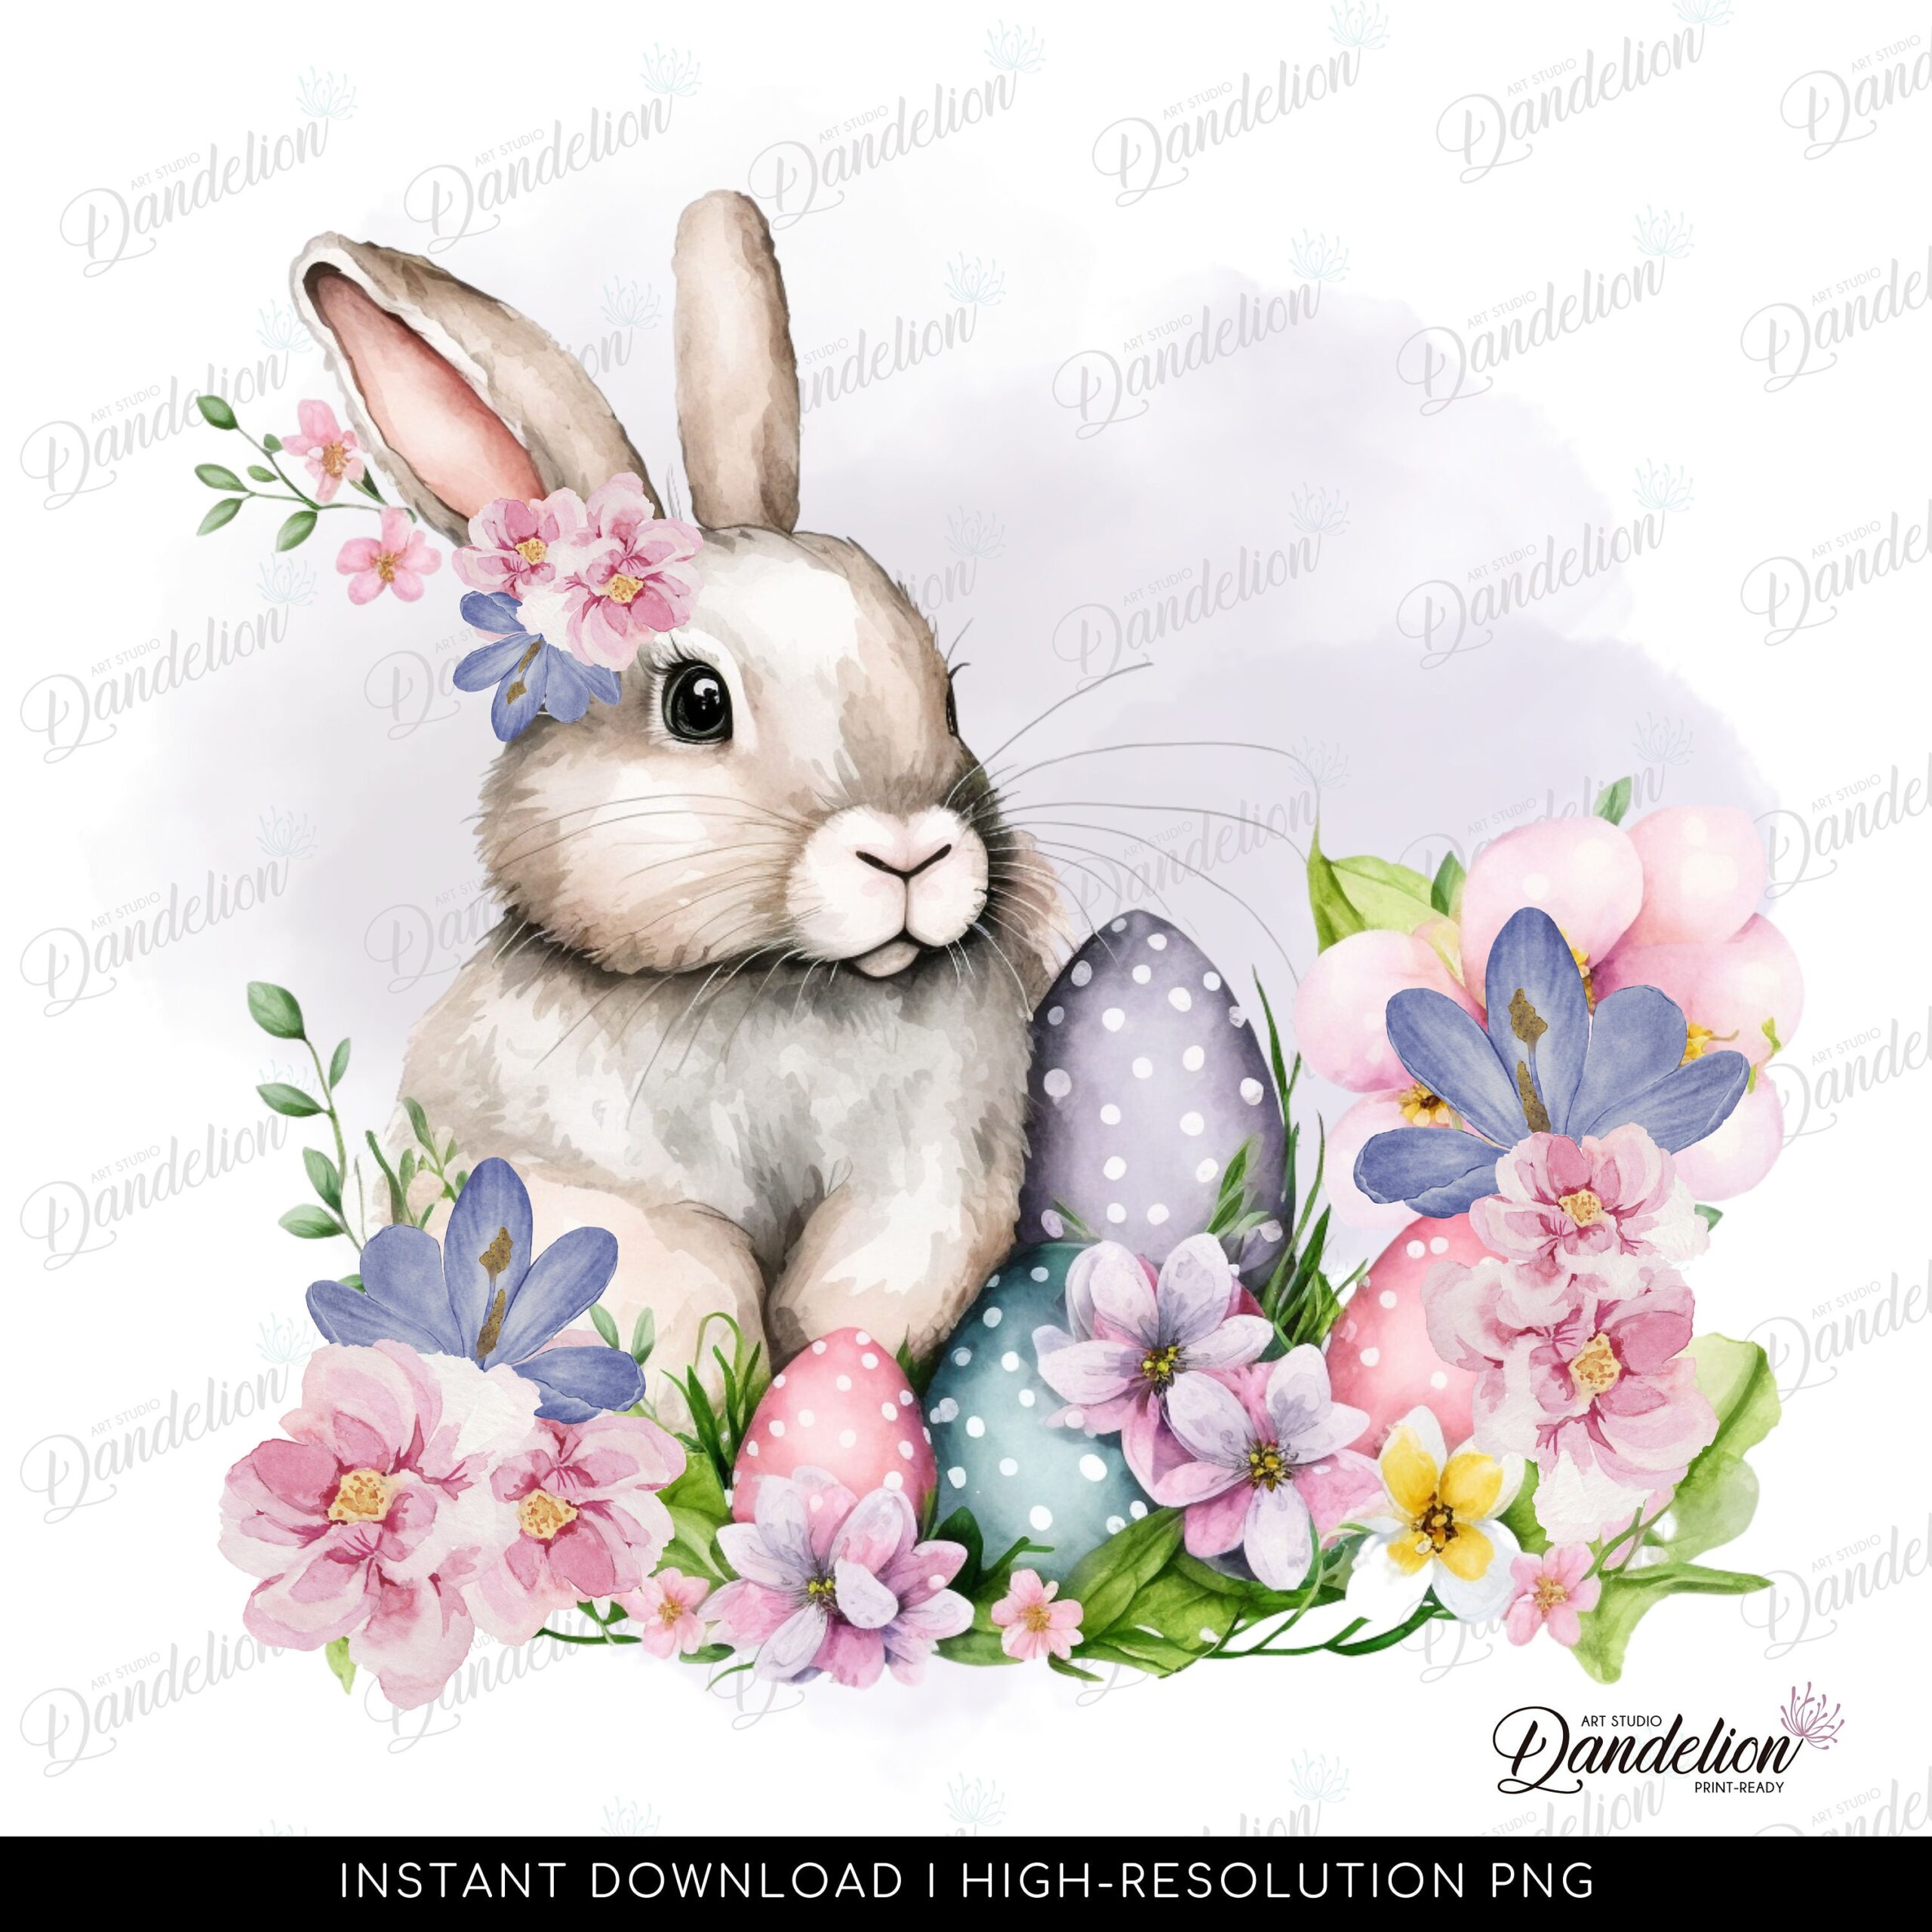 Sublimation PNG Design, Watercolor Easter Bunny, Cute Bunny, Floral Bunny, Cute Easter Bunny with Eggs - High-Resolution Transparent png